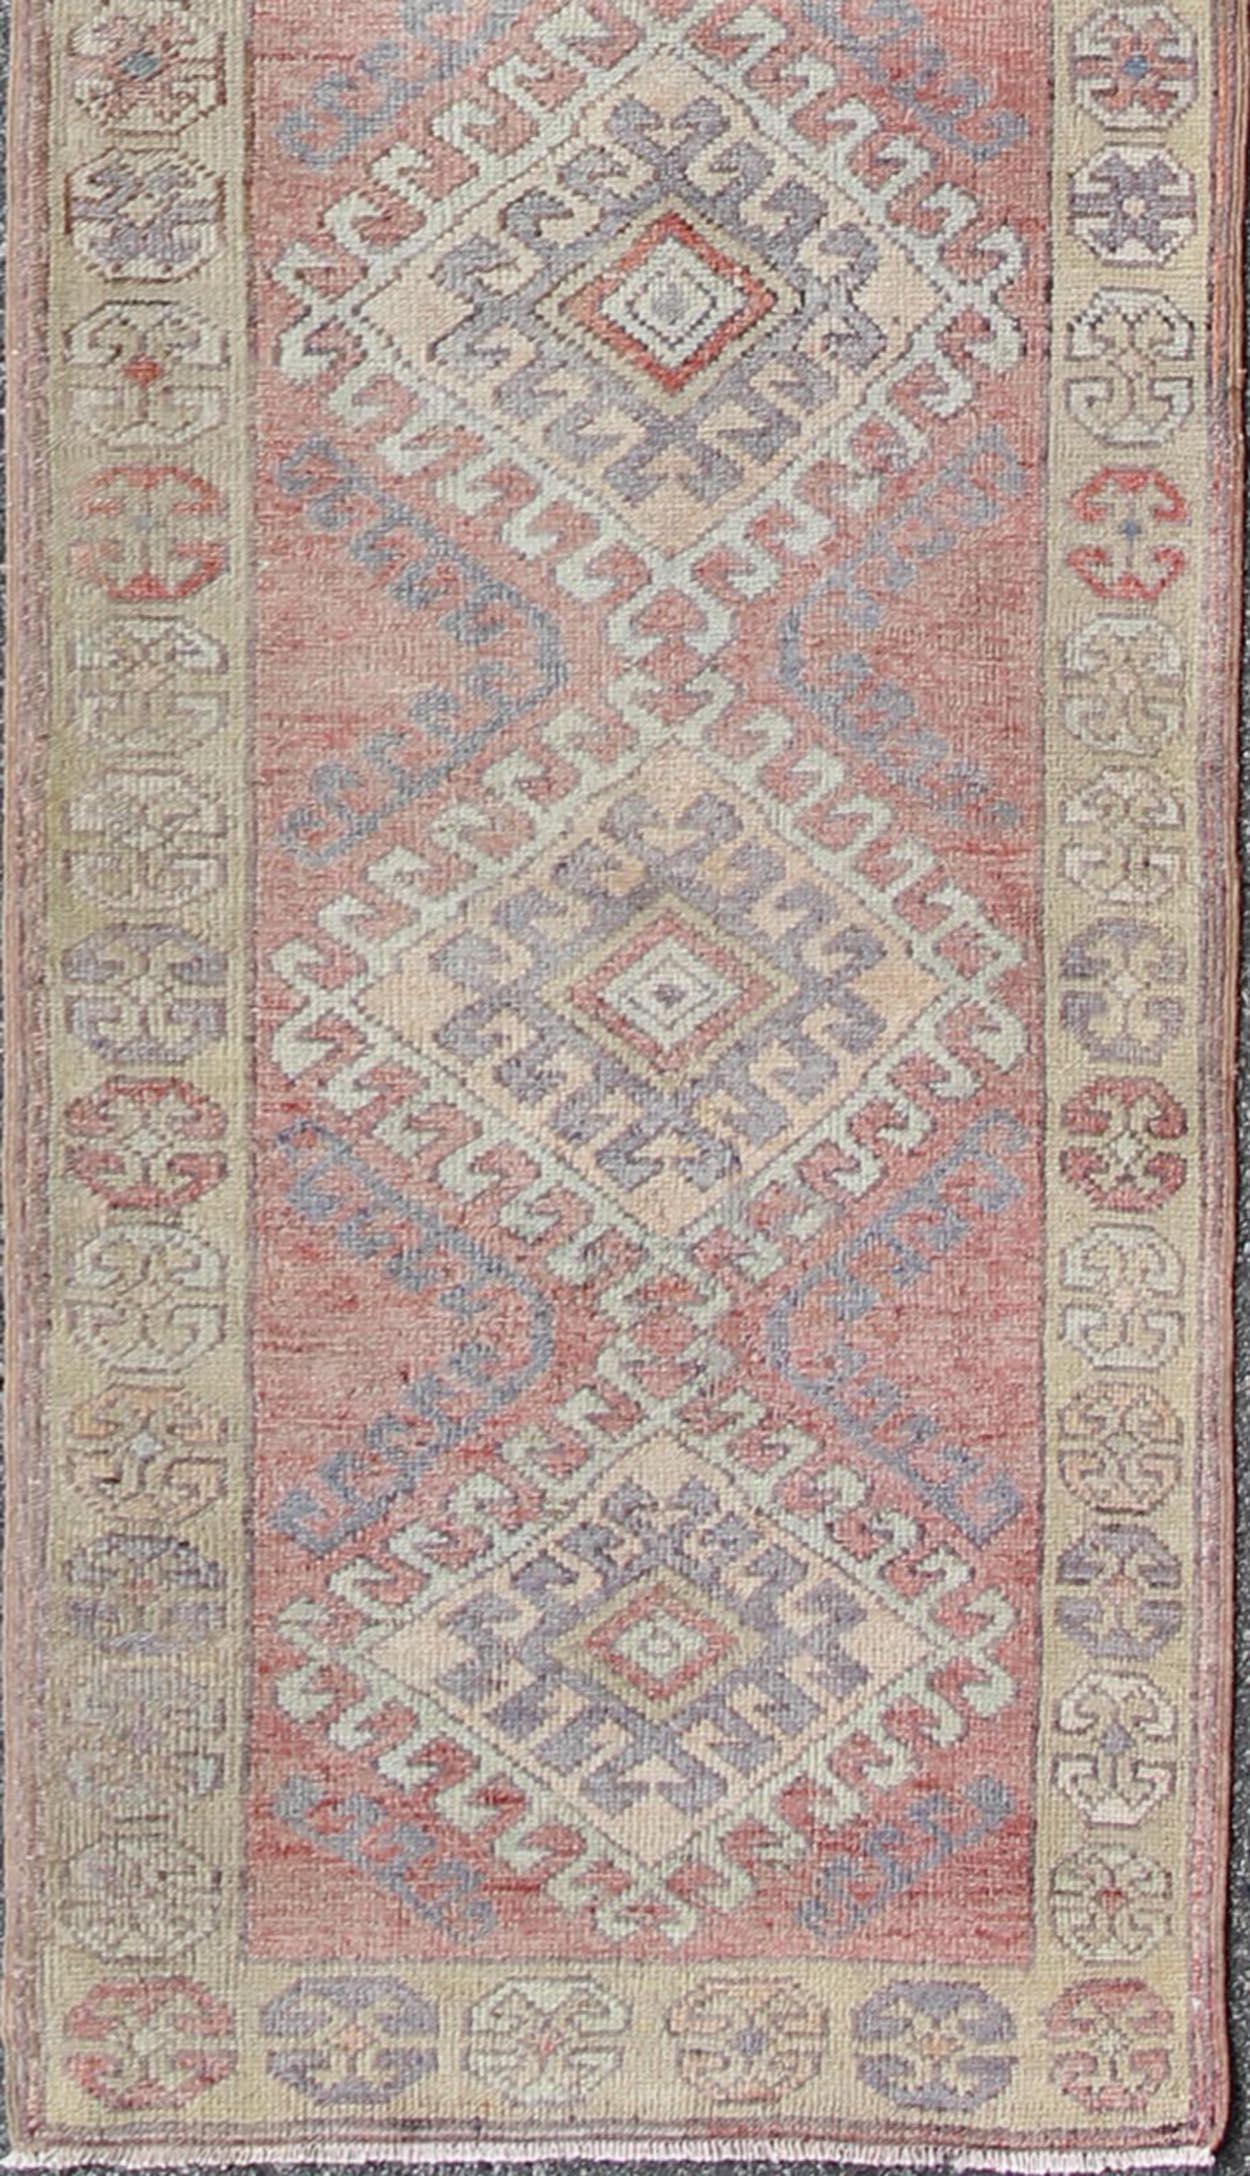 Multi-toned Medallion Oushak carpet, rug en-165756, country of origin / type: Turkey / Oushak, circa 1940

This Oushak carpet from mid-20th century Turkey features a multi-medallion design rendered in hook and latch patterns and a variety of color